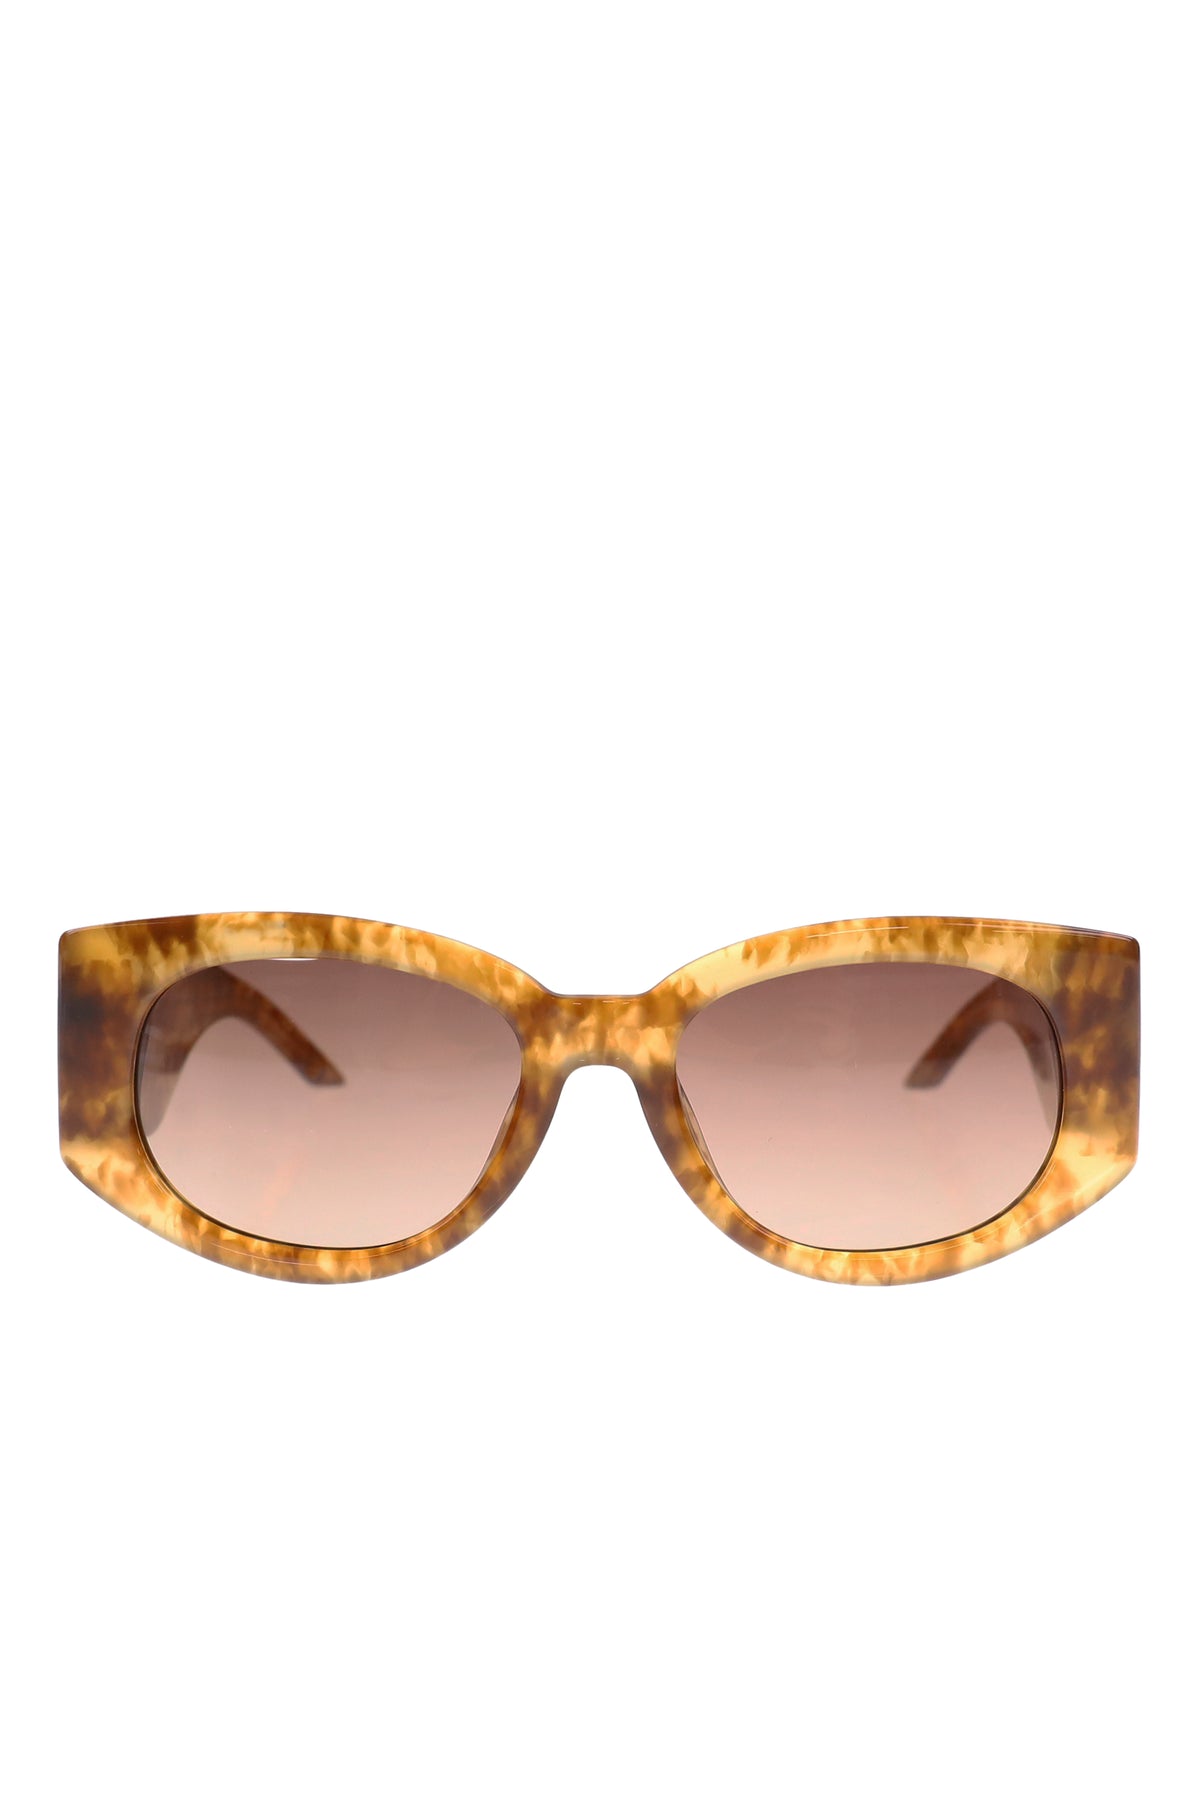 ACETATE & METAL OVAL WAVE / GOLD BRW